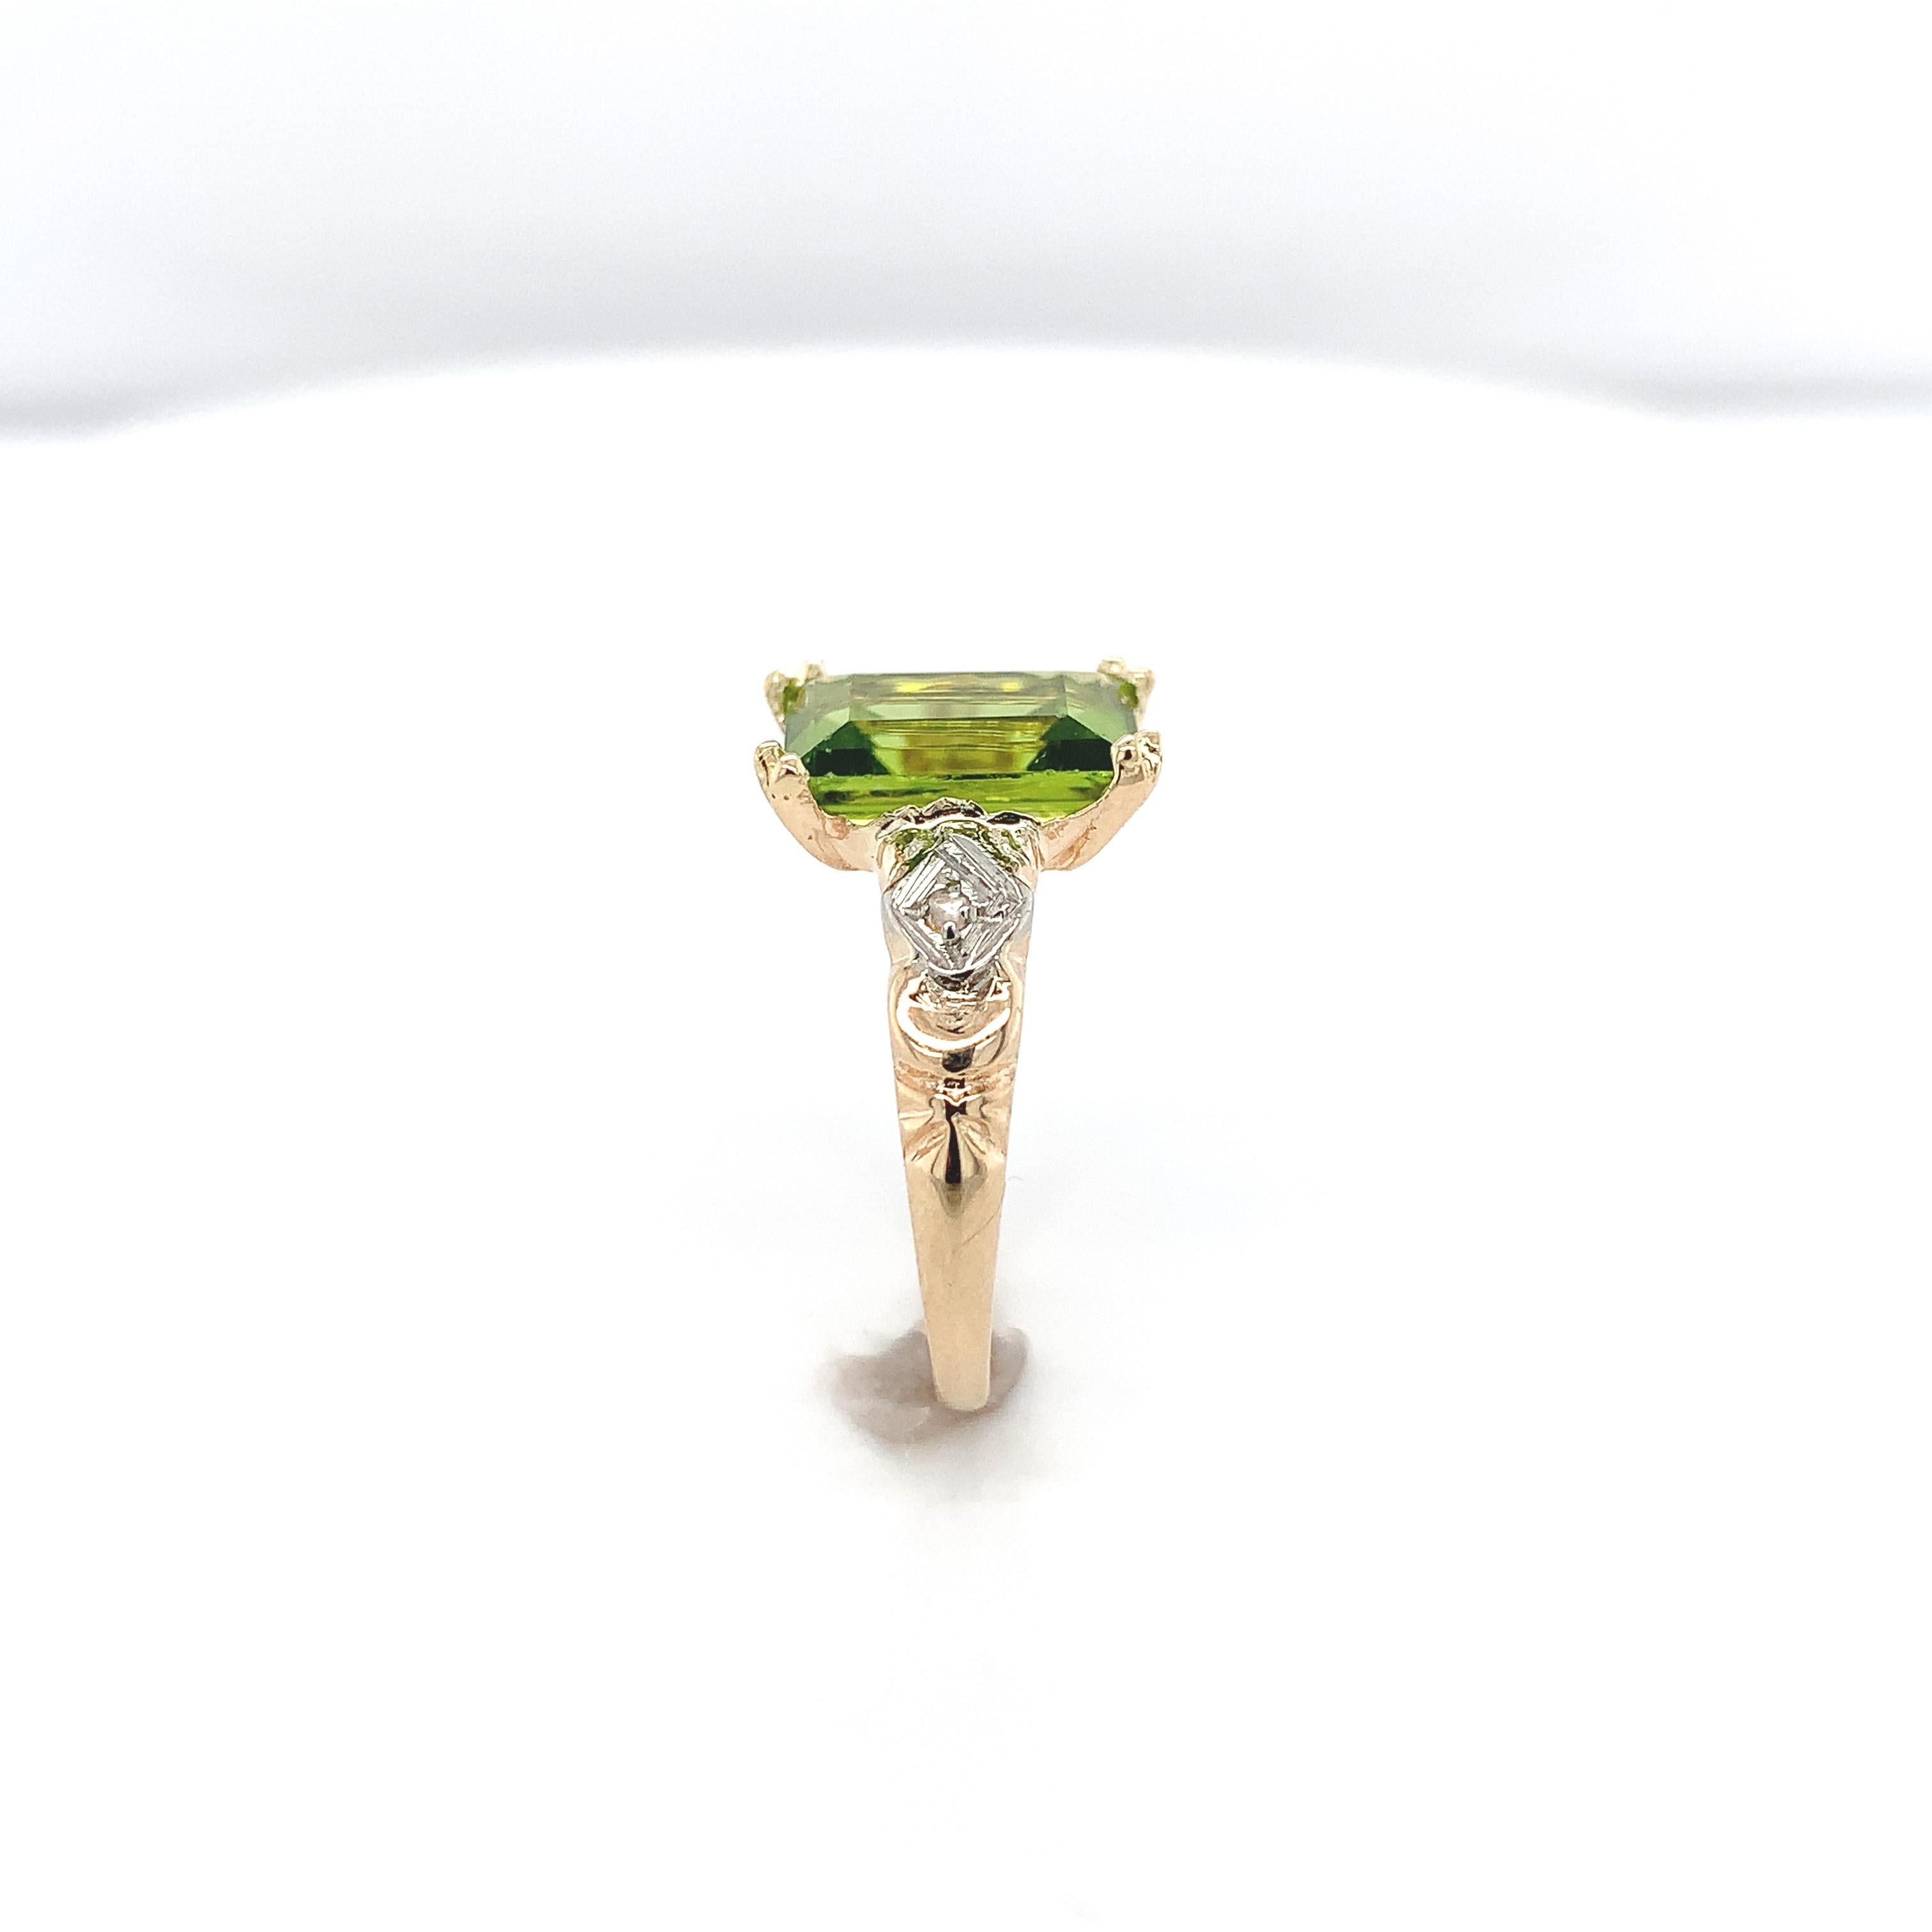 10K Yellow Gold Vintage 3.48 carat Emerald Cut Peridot Ring In Good Condition For Sale In Big Bend, WI